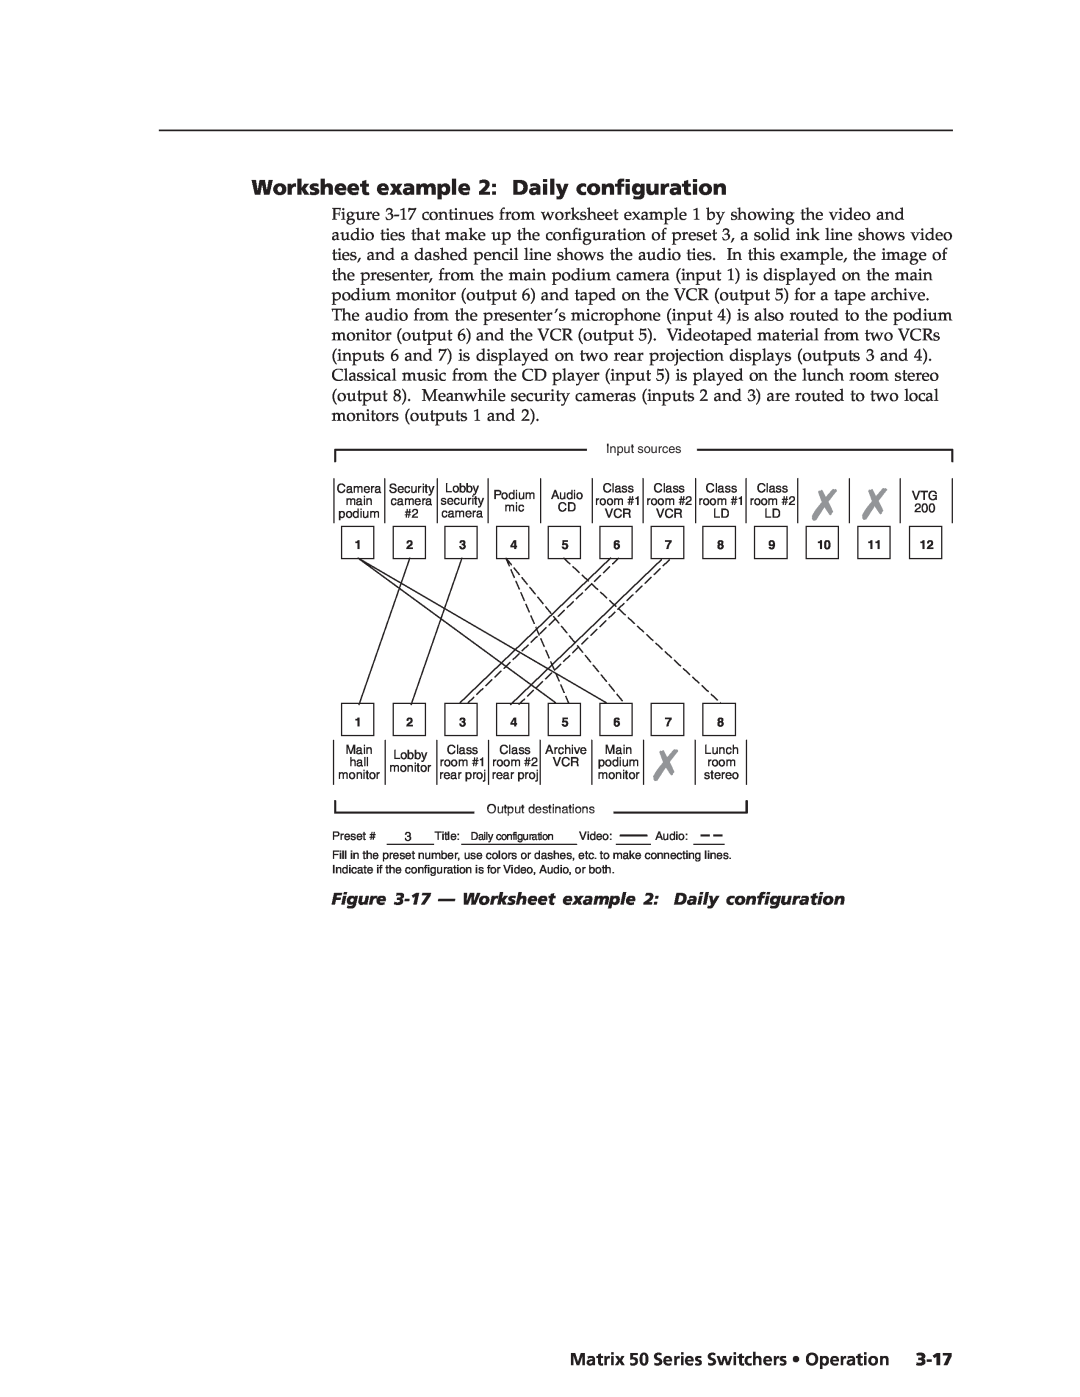 Extron electronic manual 17 - Worksheet example 2 Daily configuration, Matrix 50 Series Switchers Operation 